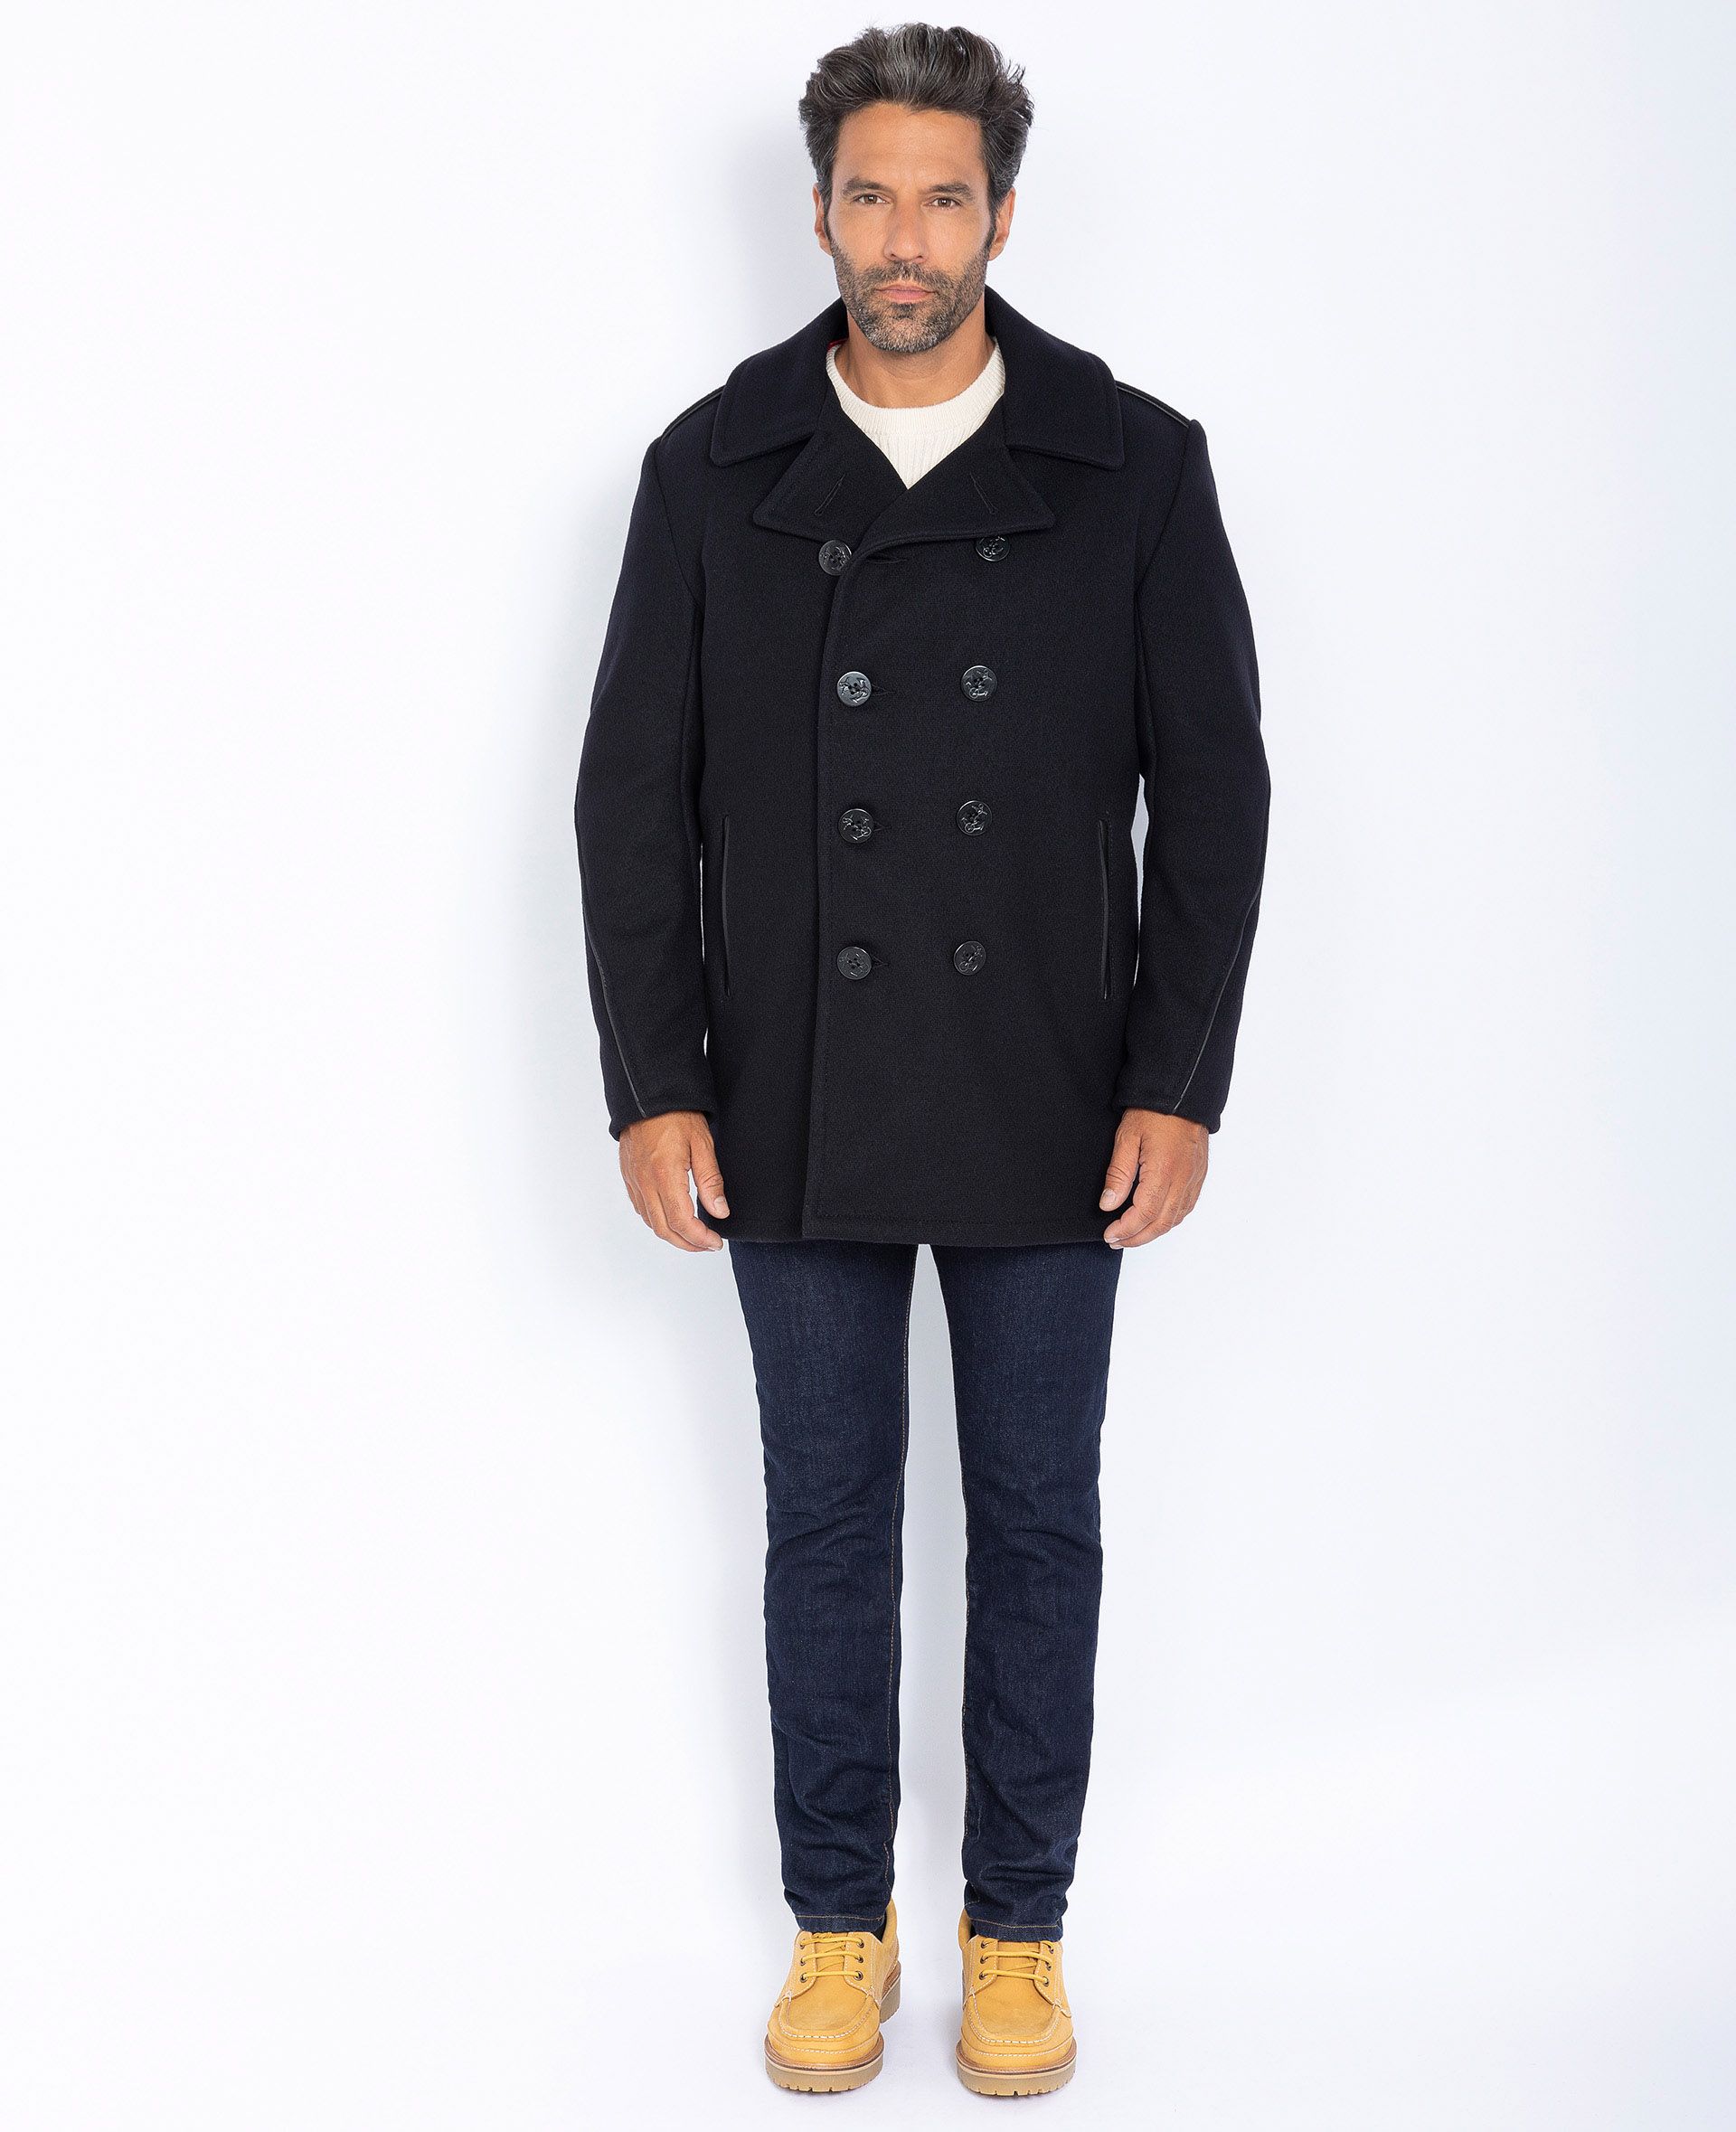 Buy Fitted peacoat, mythical USA man 75% wool / 25% nylon